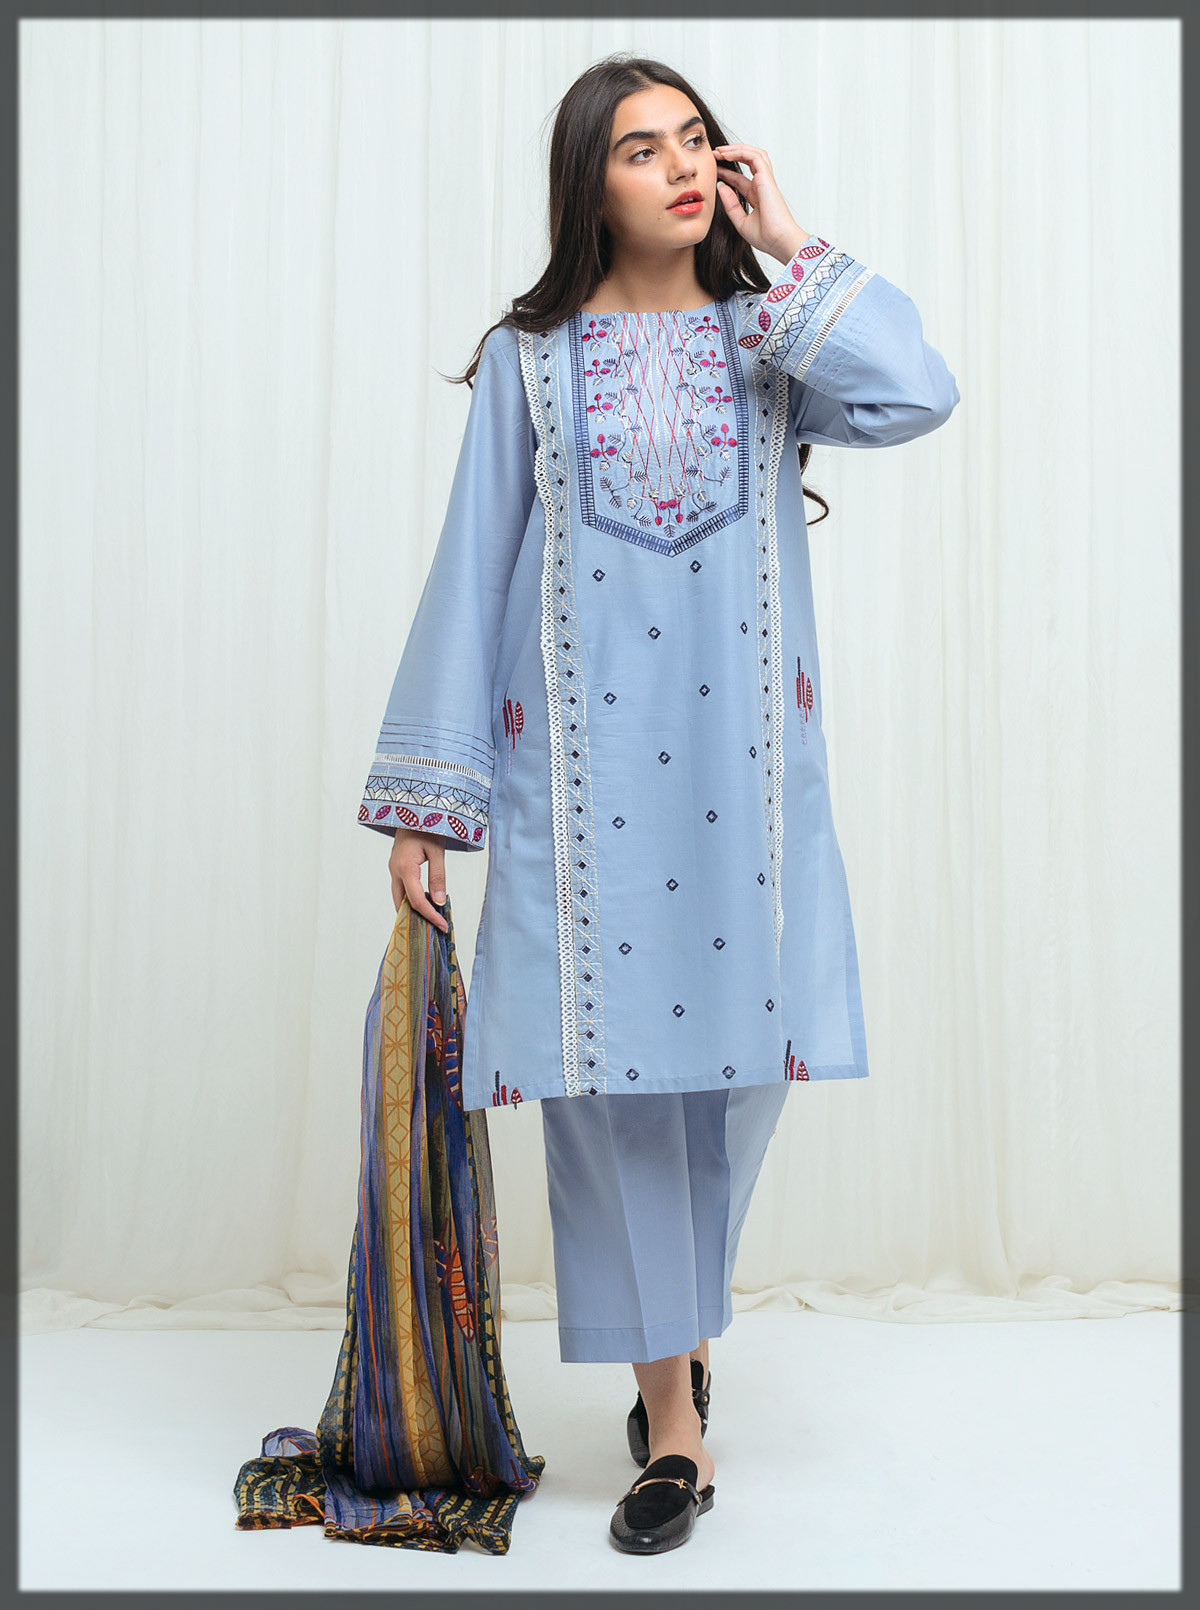 BeechTree Spring Summer Collection for women